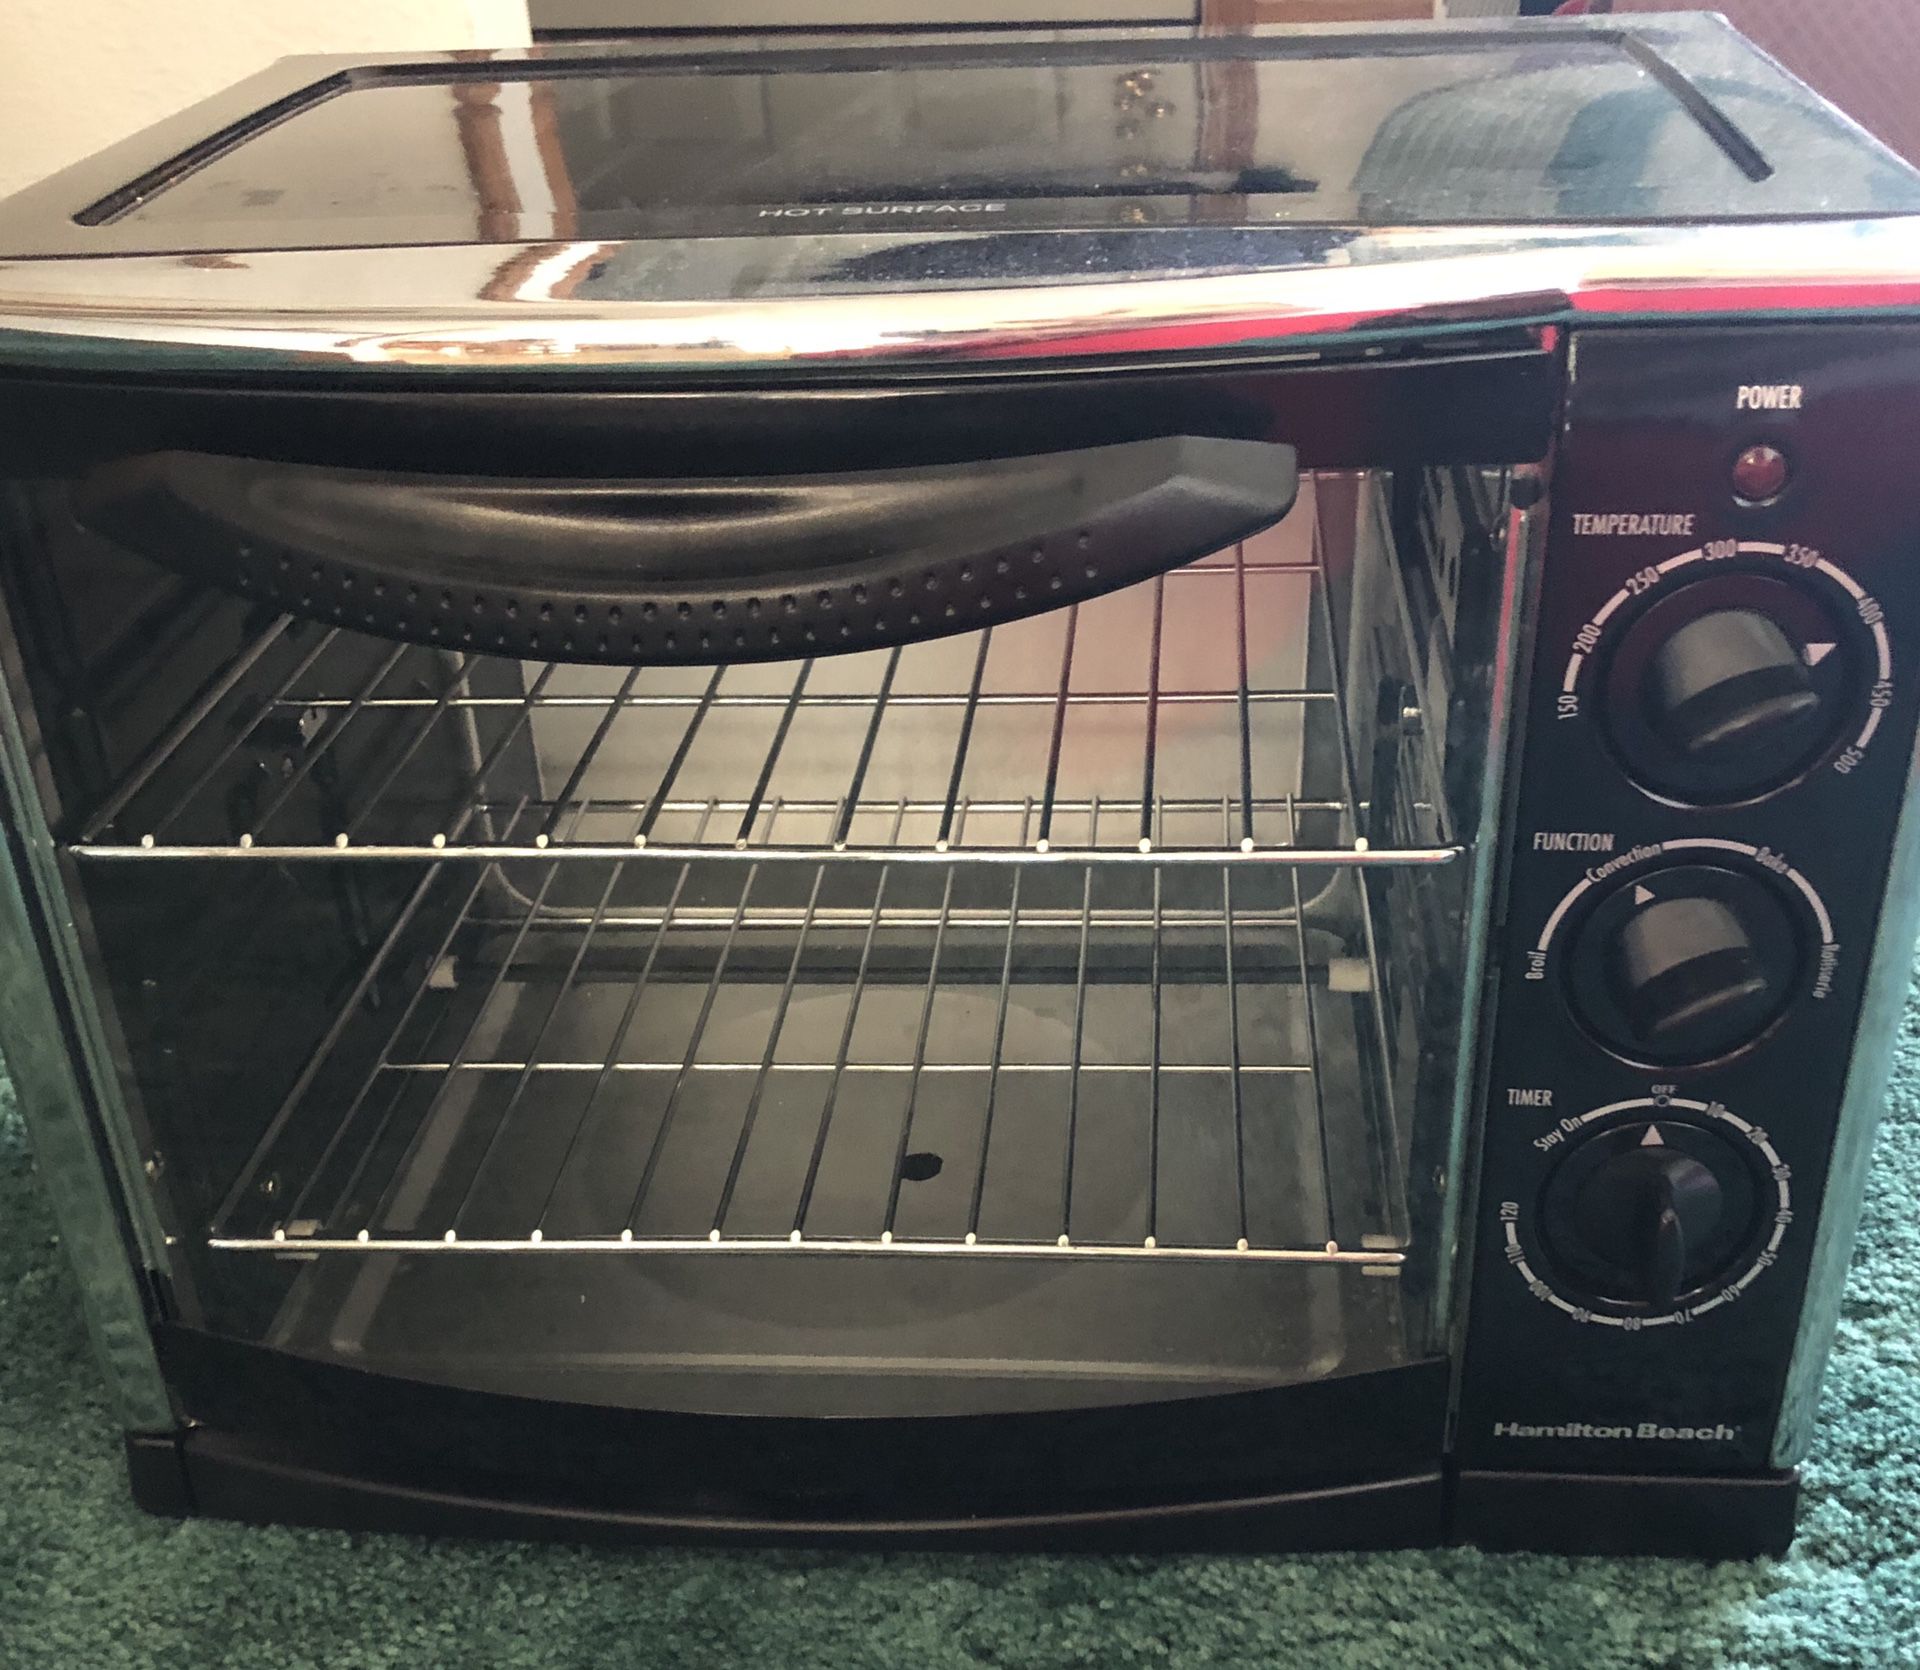 Convection oven— Great for Dorm room